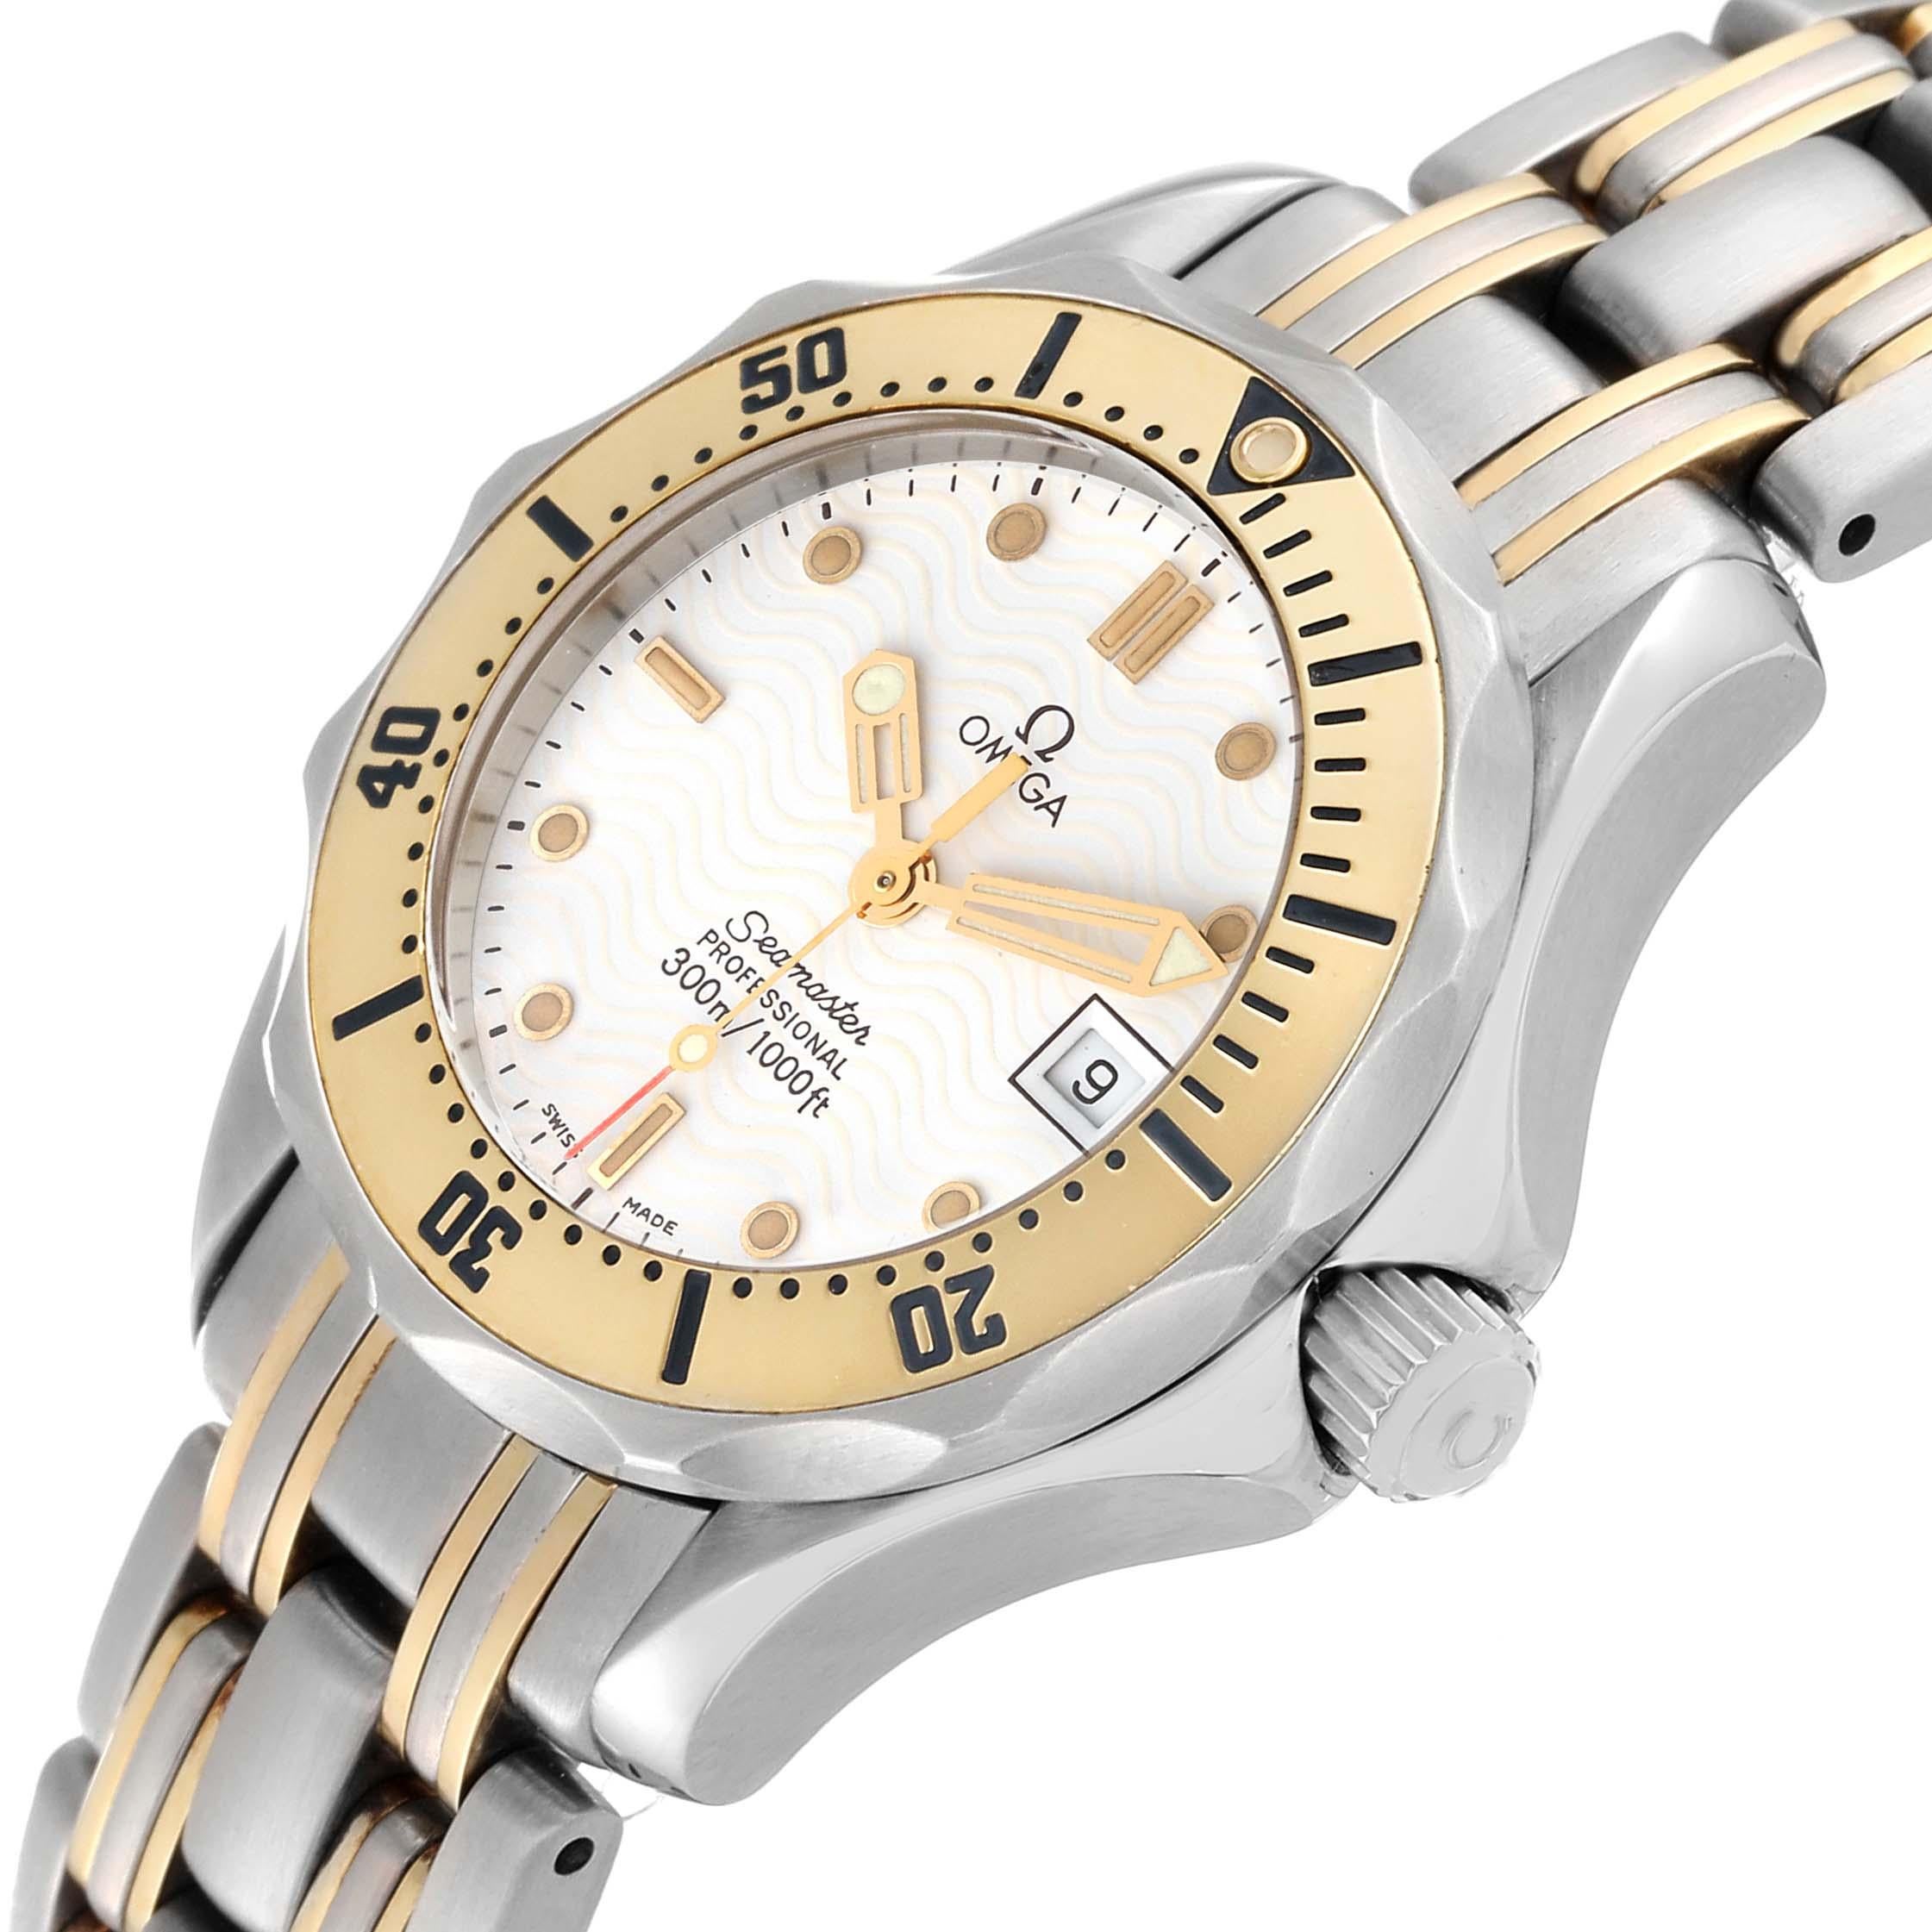 Omega Seamaster Diver Steel Yellow Gold Ladies Watch 2382.20.00 Box Card For Sale 4